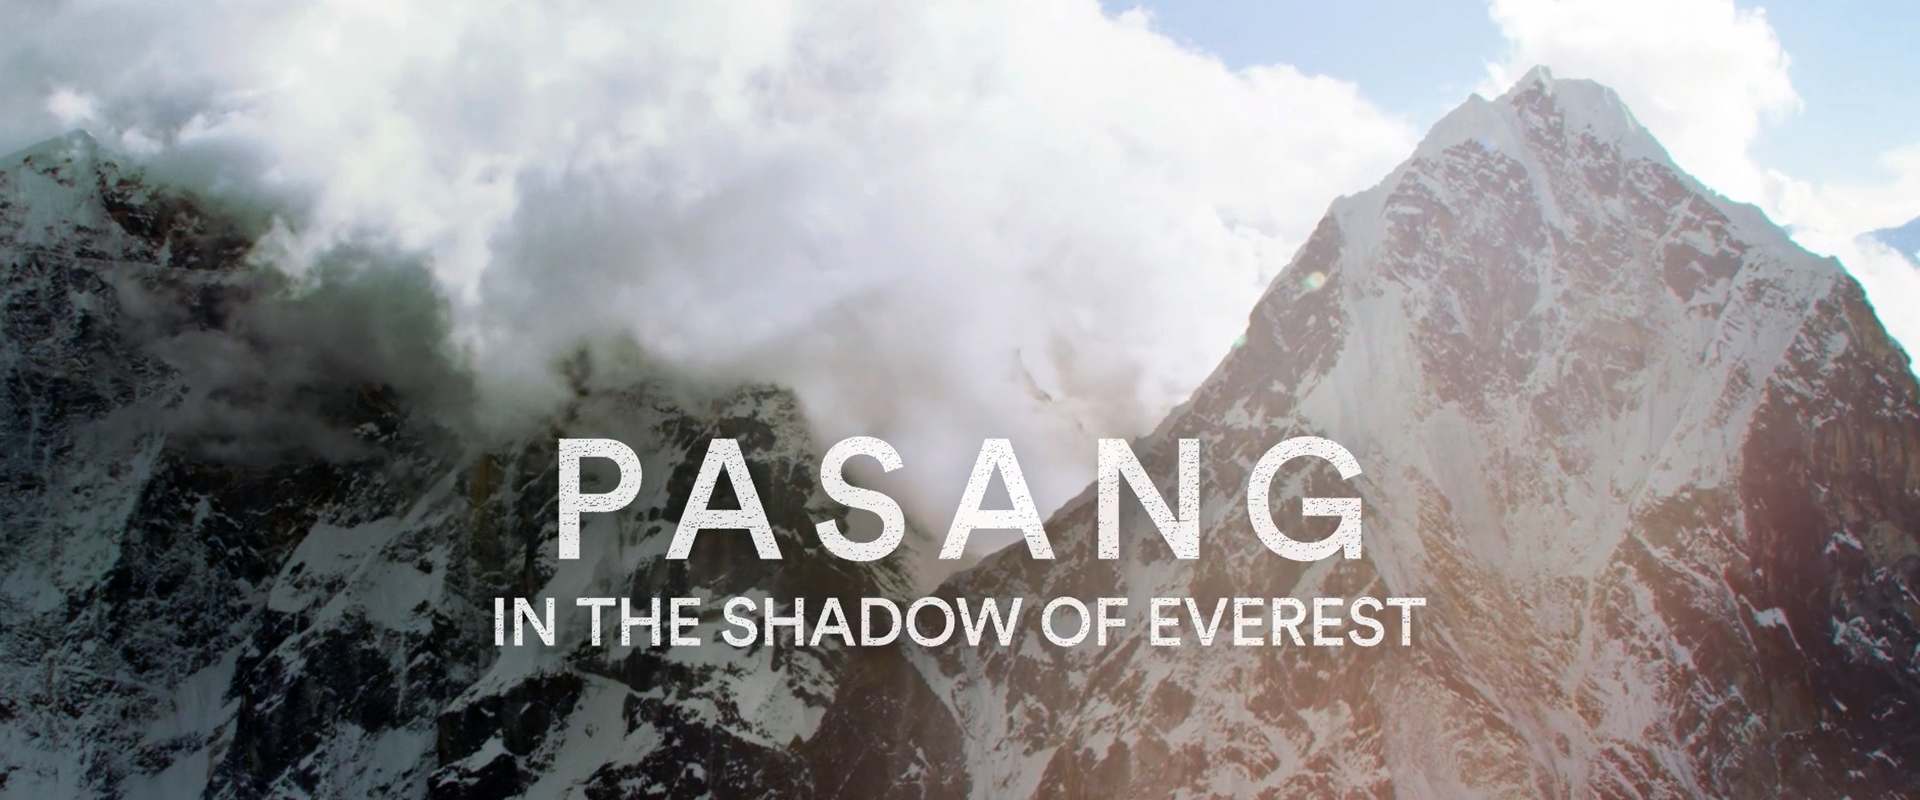 Pasang: In the Shadow of Everest background 1